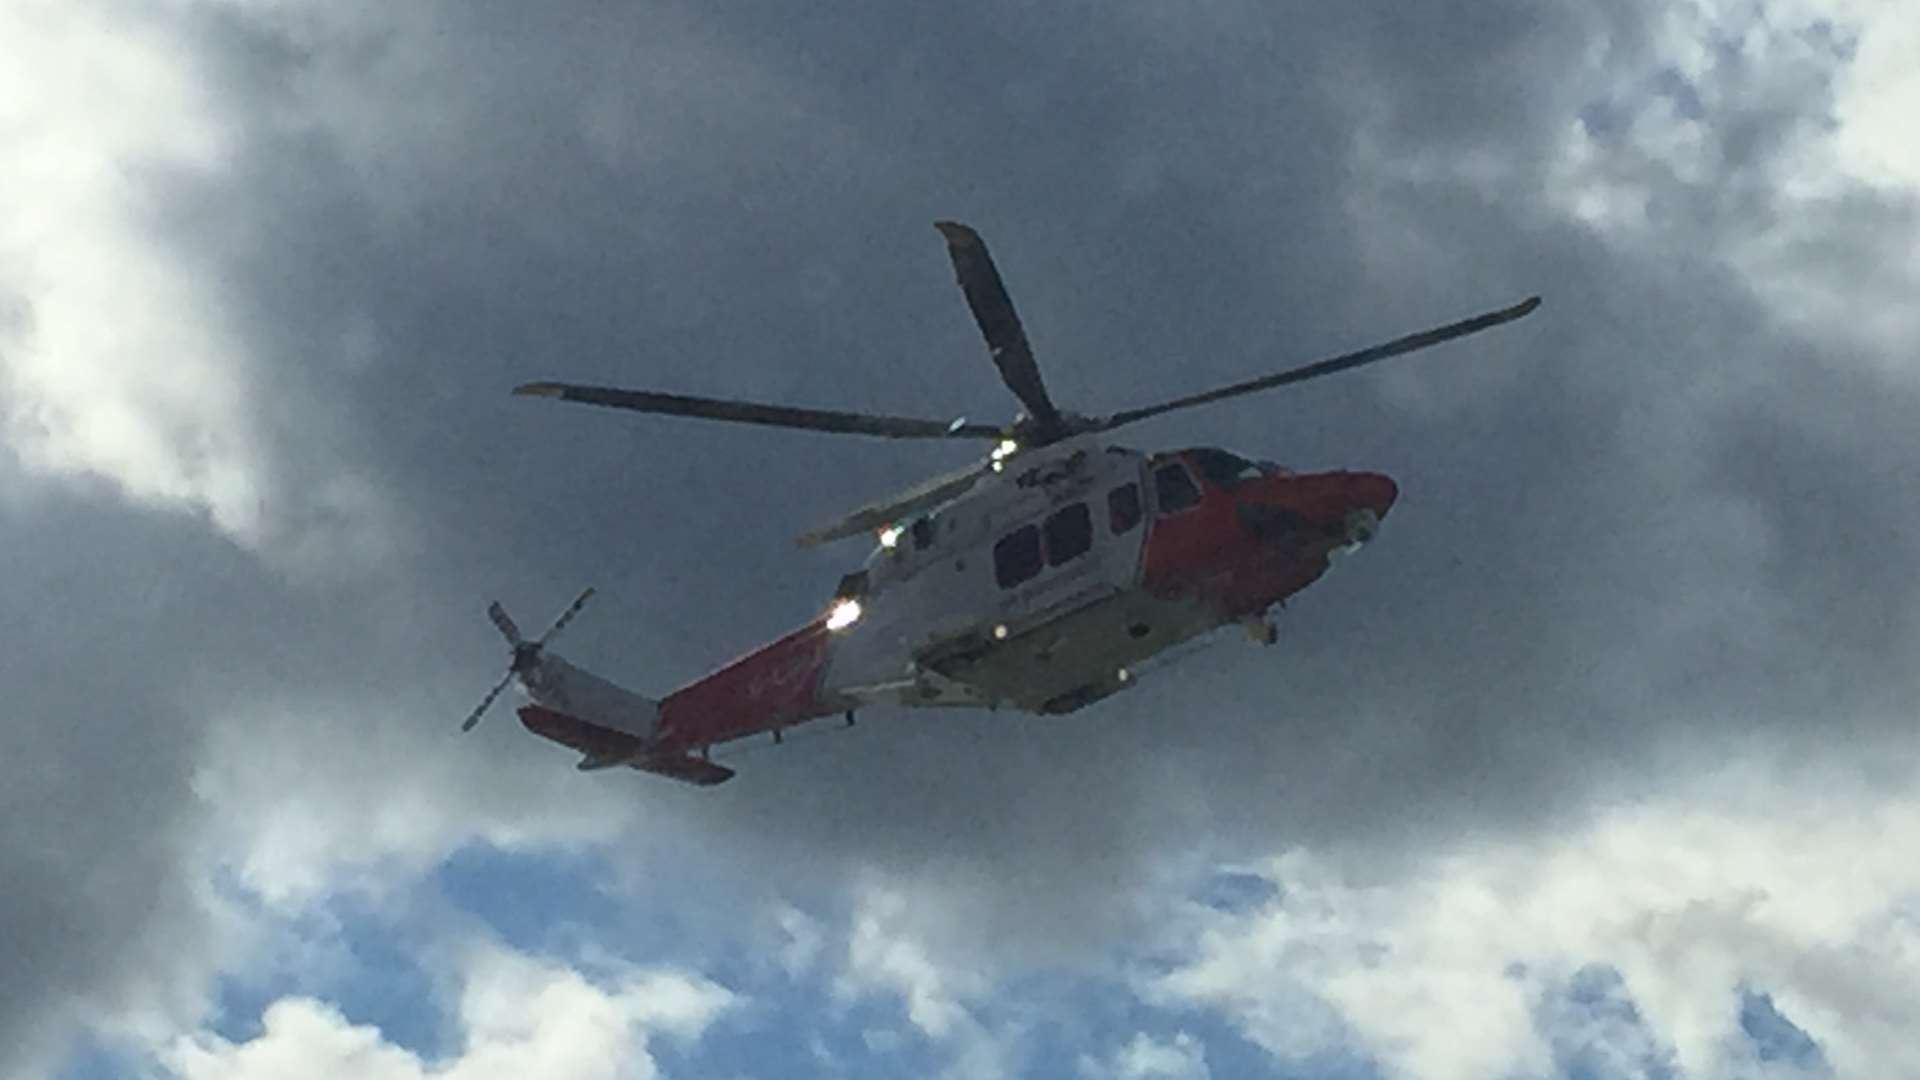 The Coastguard helicopter has been scrambled. Library image.